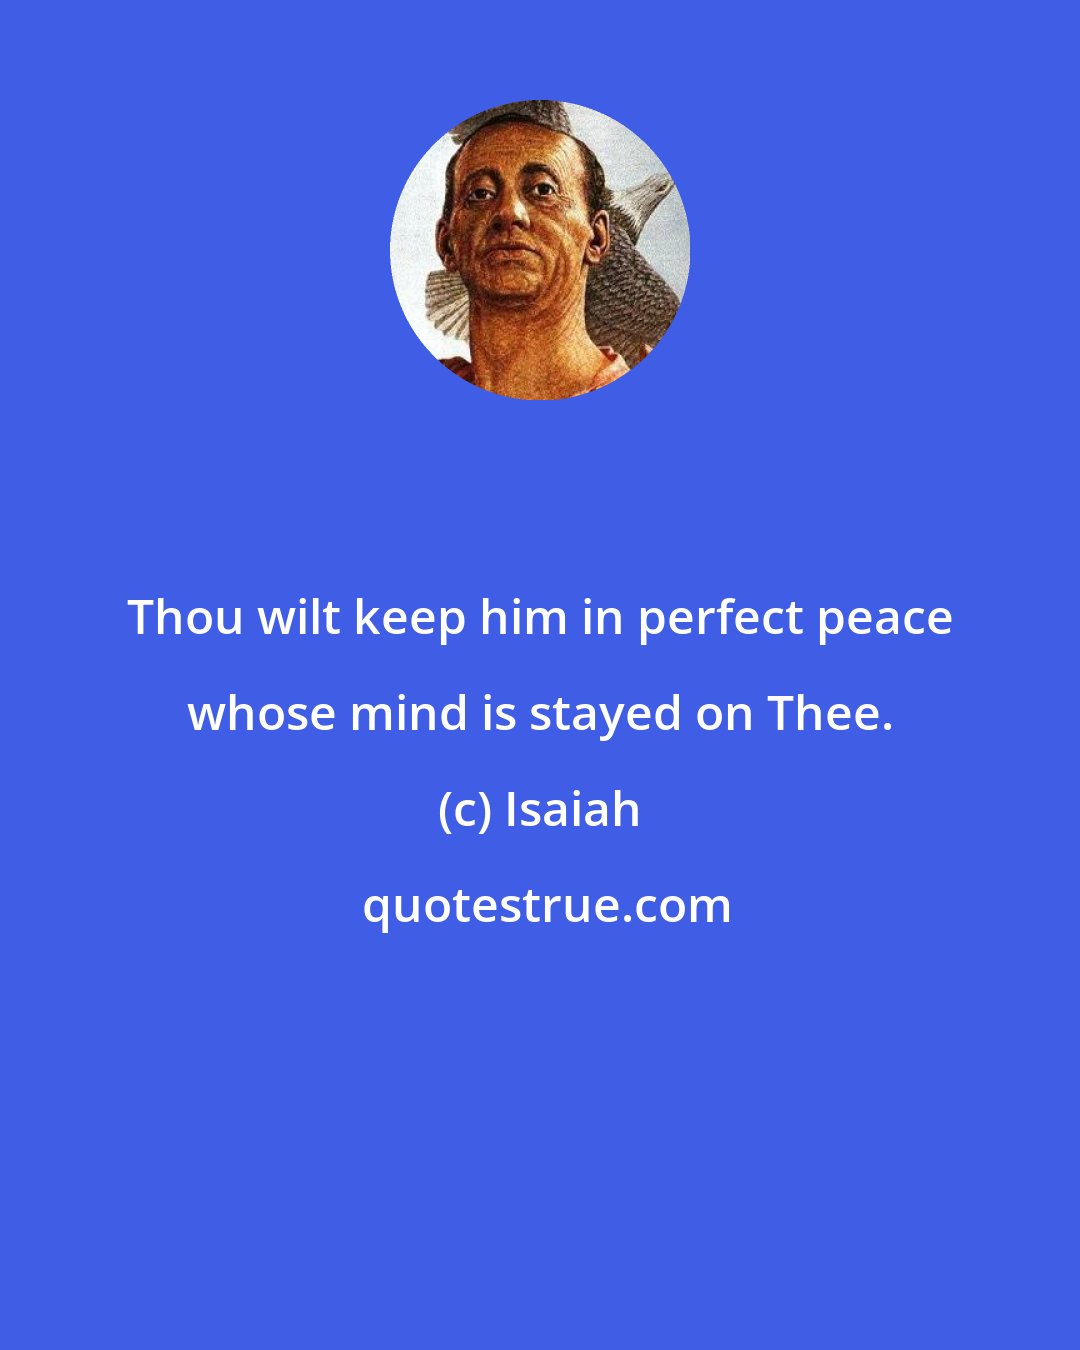 Isaiah: Thou wilt keep him in perfect peace whose mind is stayed on Thee.